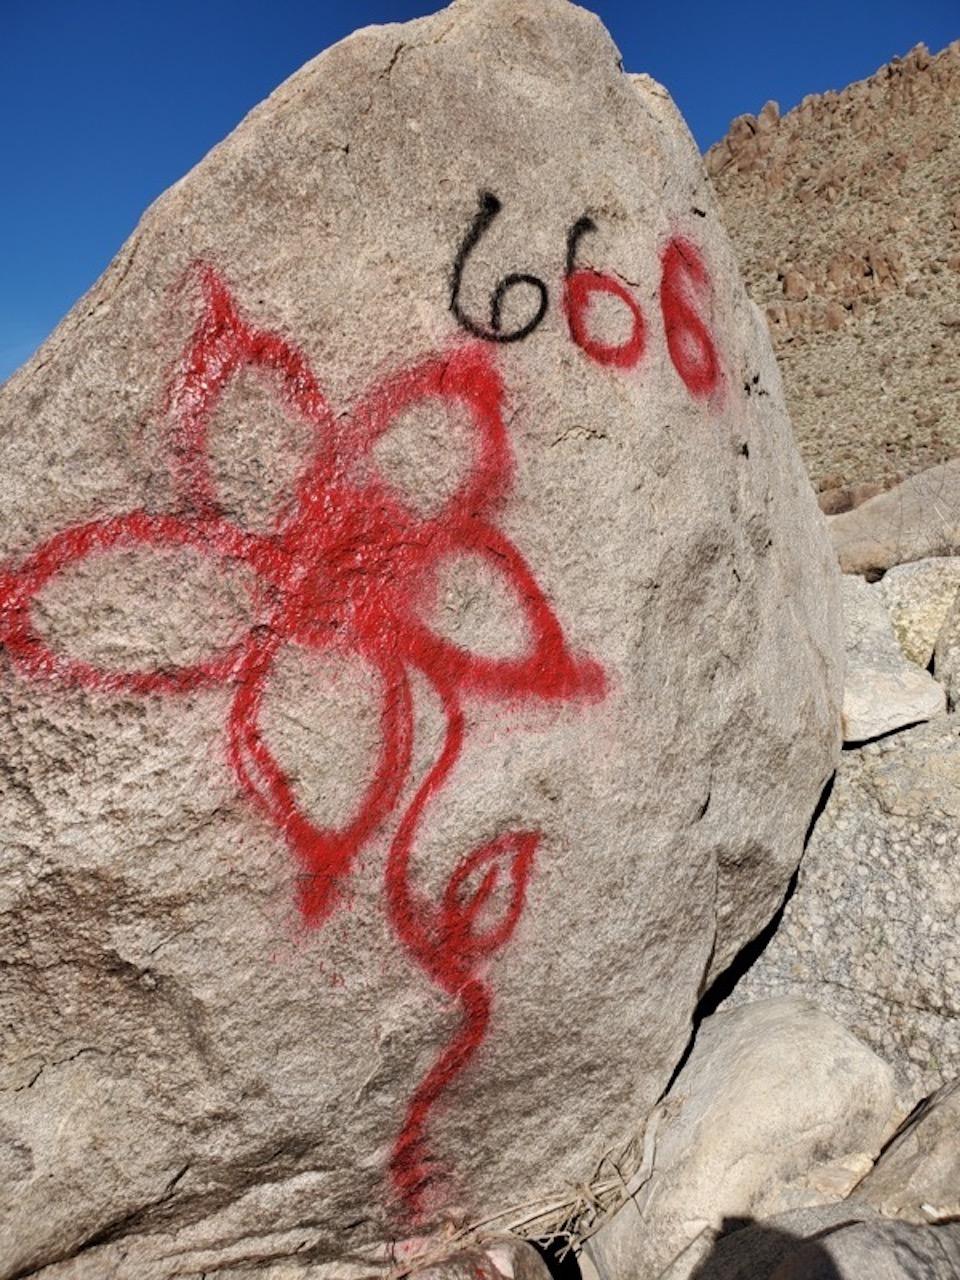 Graffiti has turned up in several areas of Joshua Tree National Park. This is in Rattlesnake Canyon/NPS, Ben Theisen